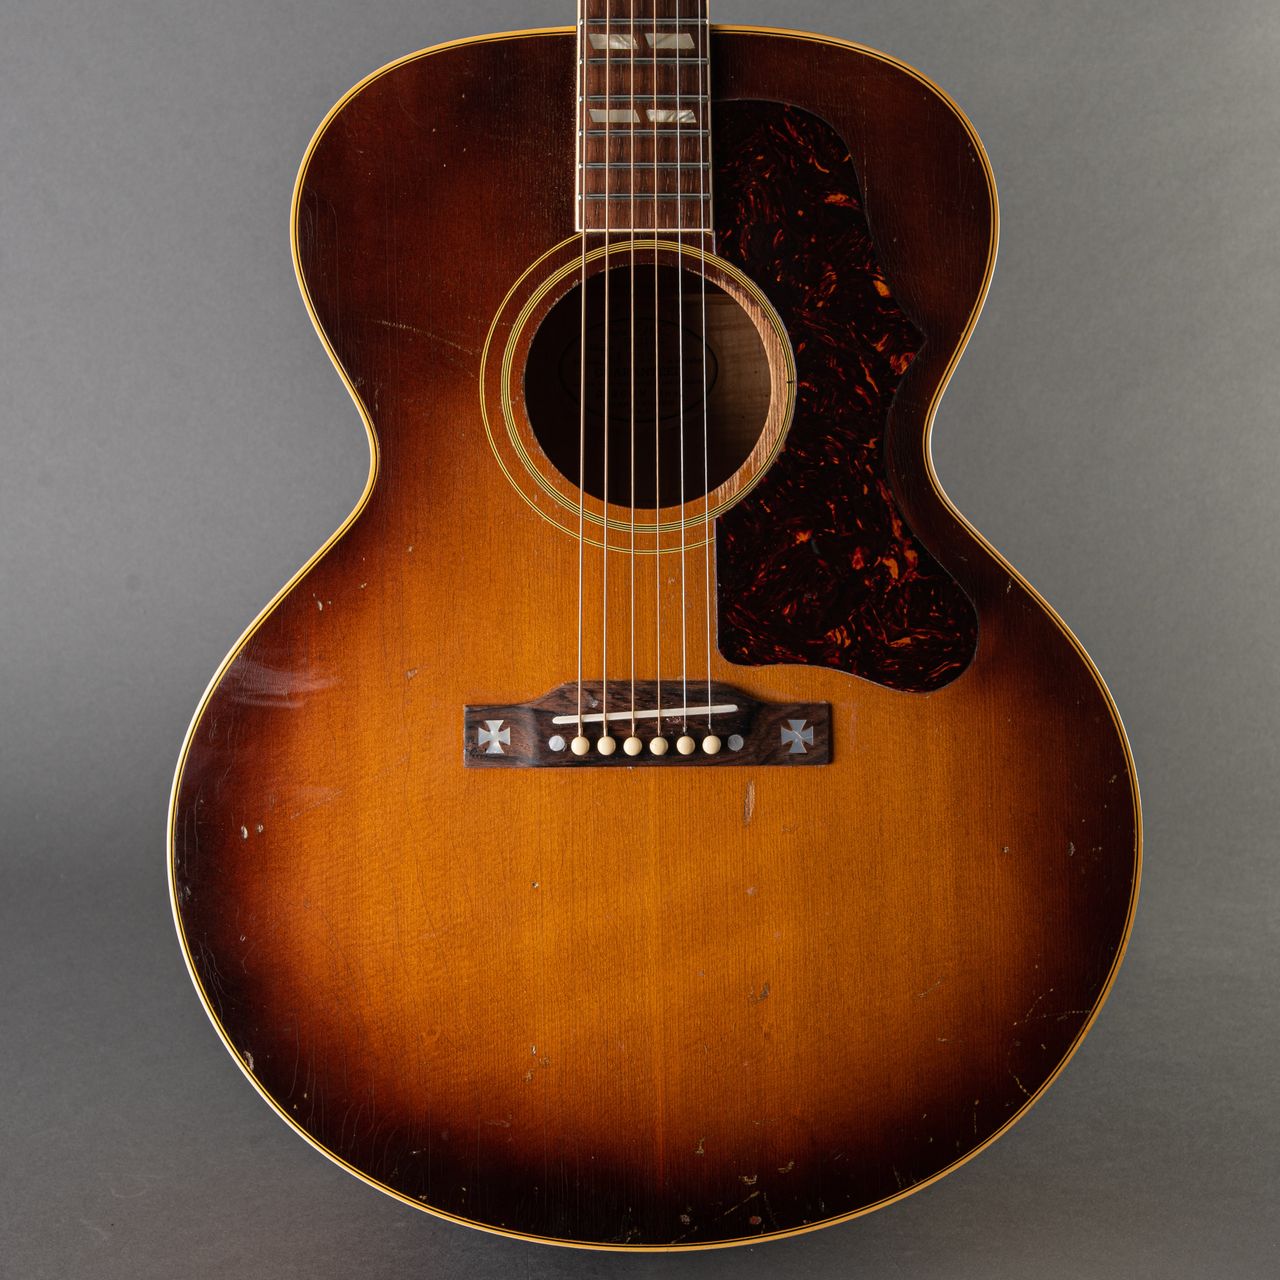 Gibson j185 historic collection - 楽器/器材